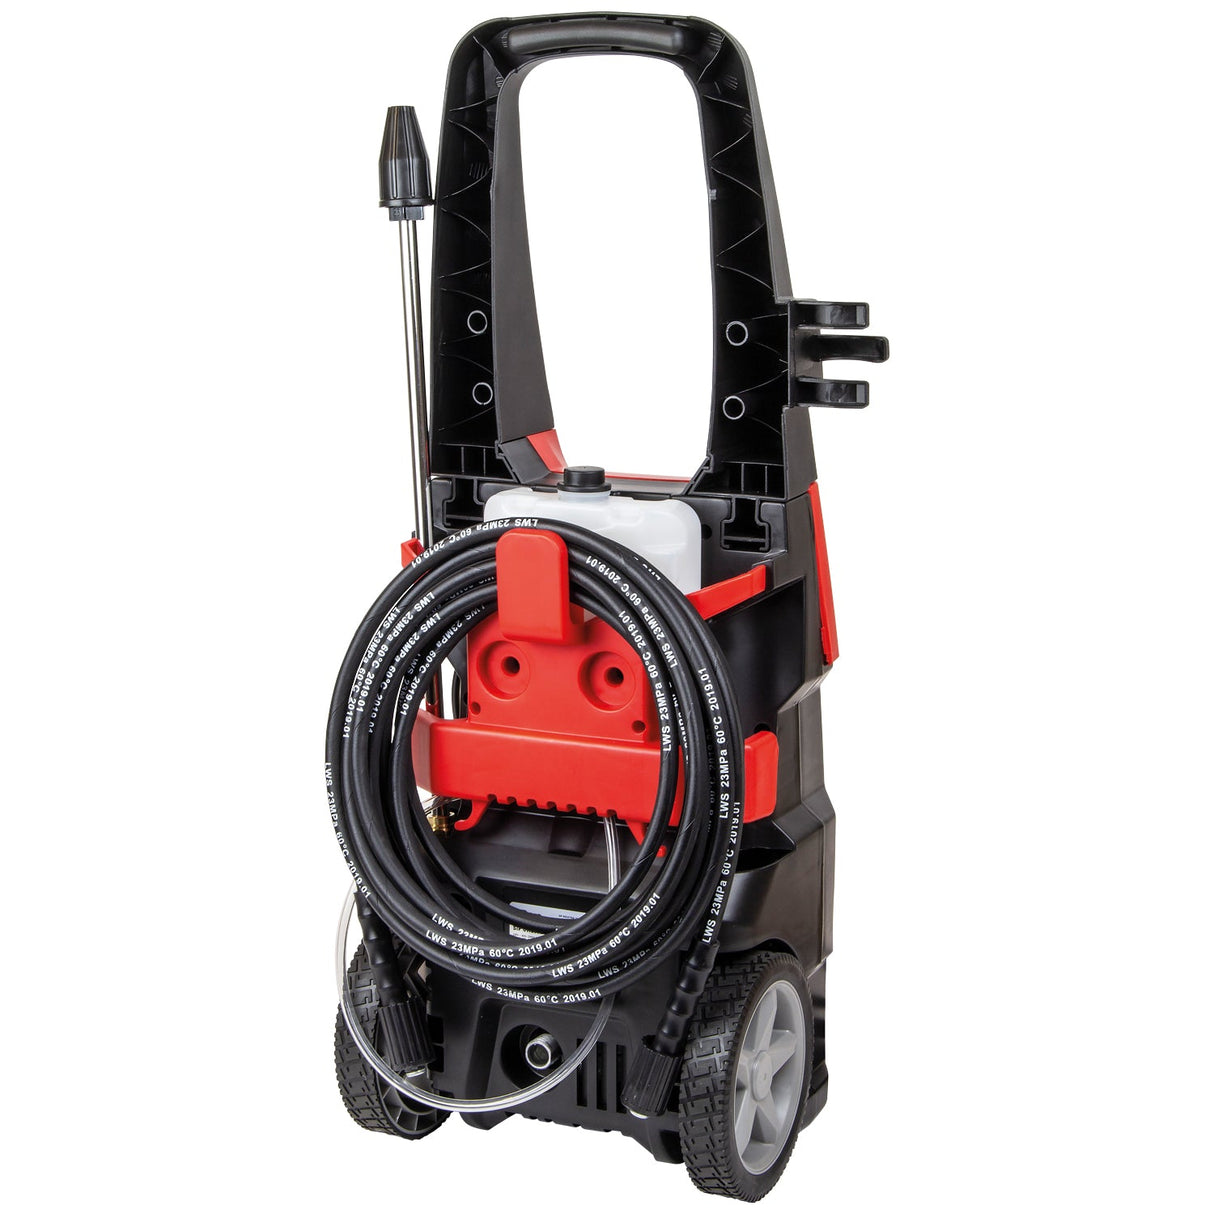 SIP - CW2300 Electric Pressure Washer - SIP-08972 - Farming Parts